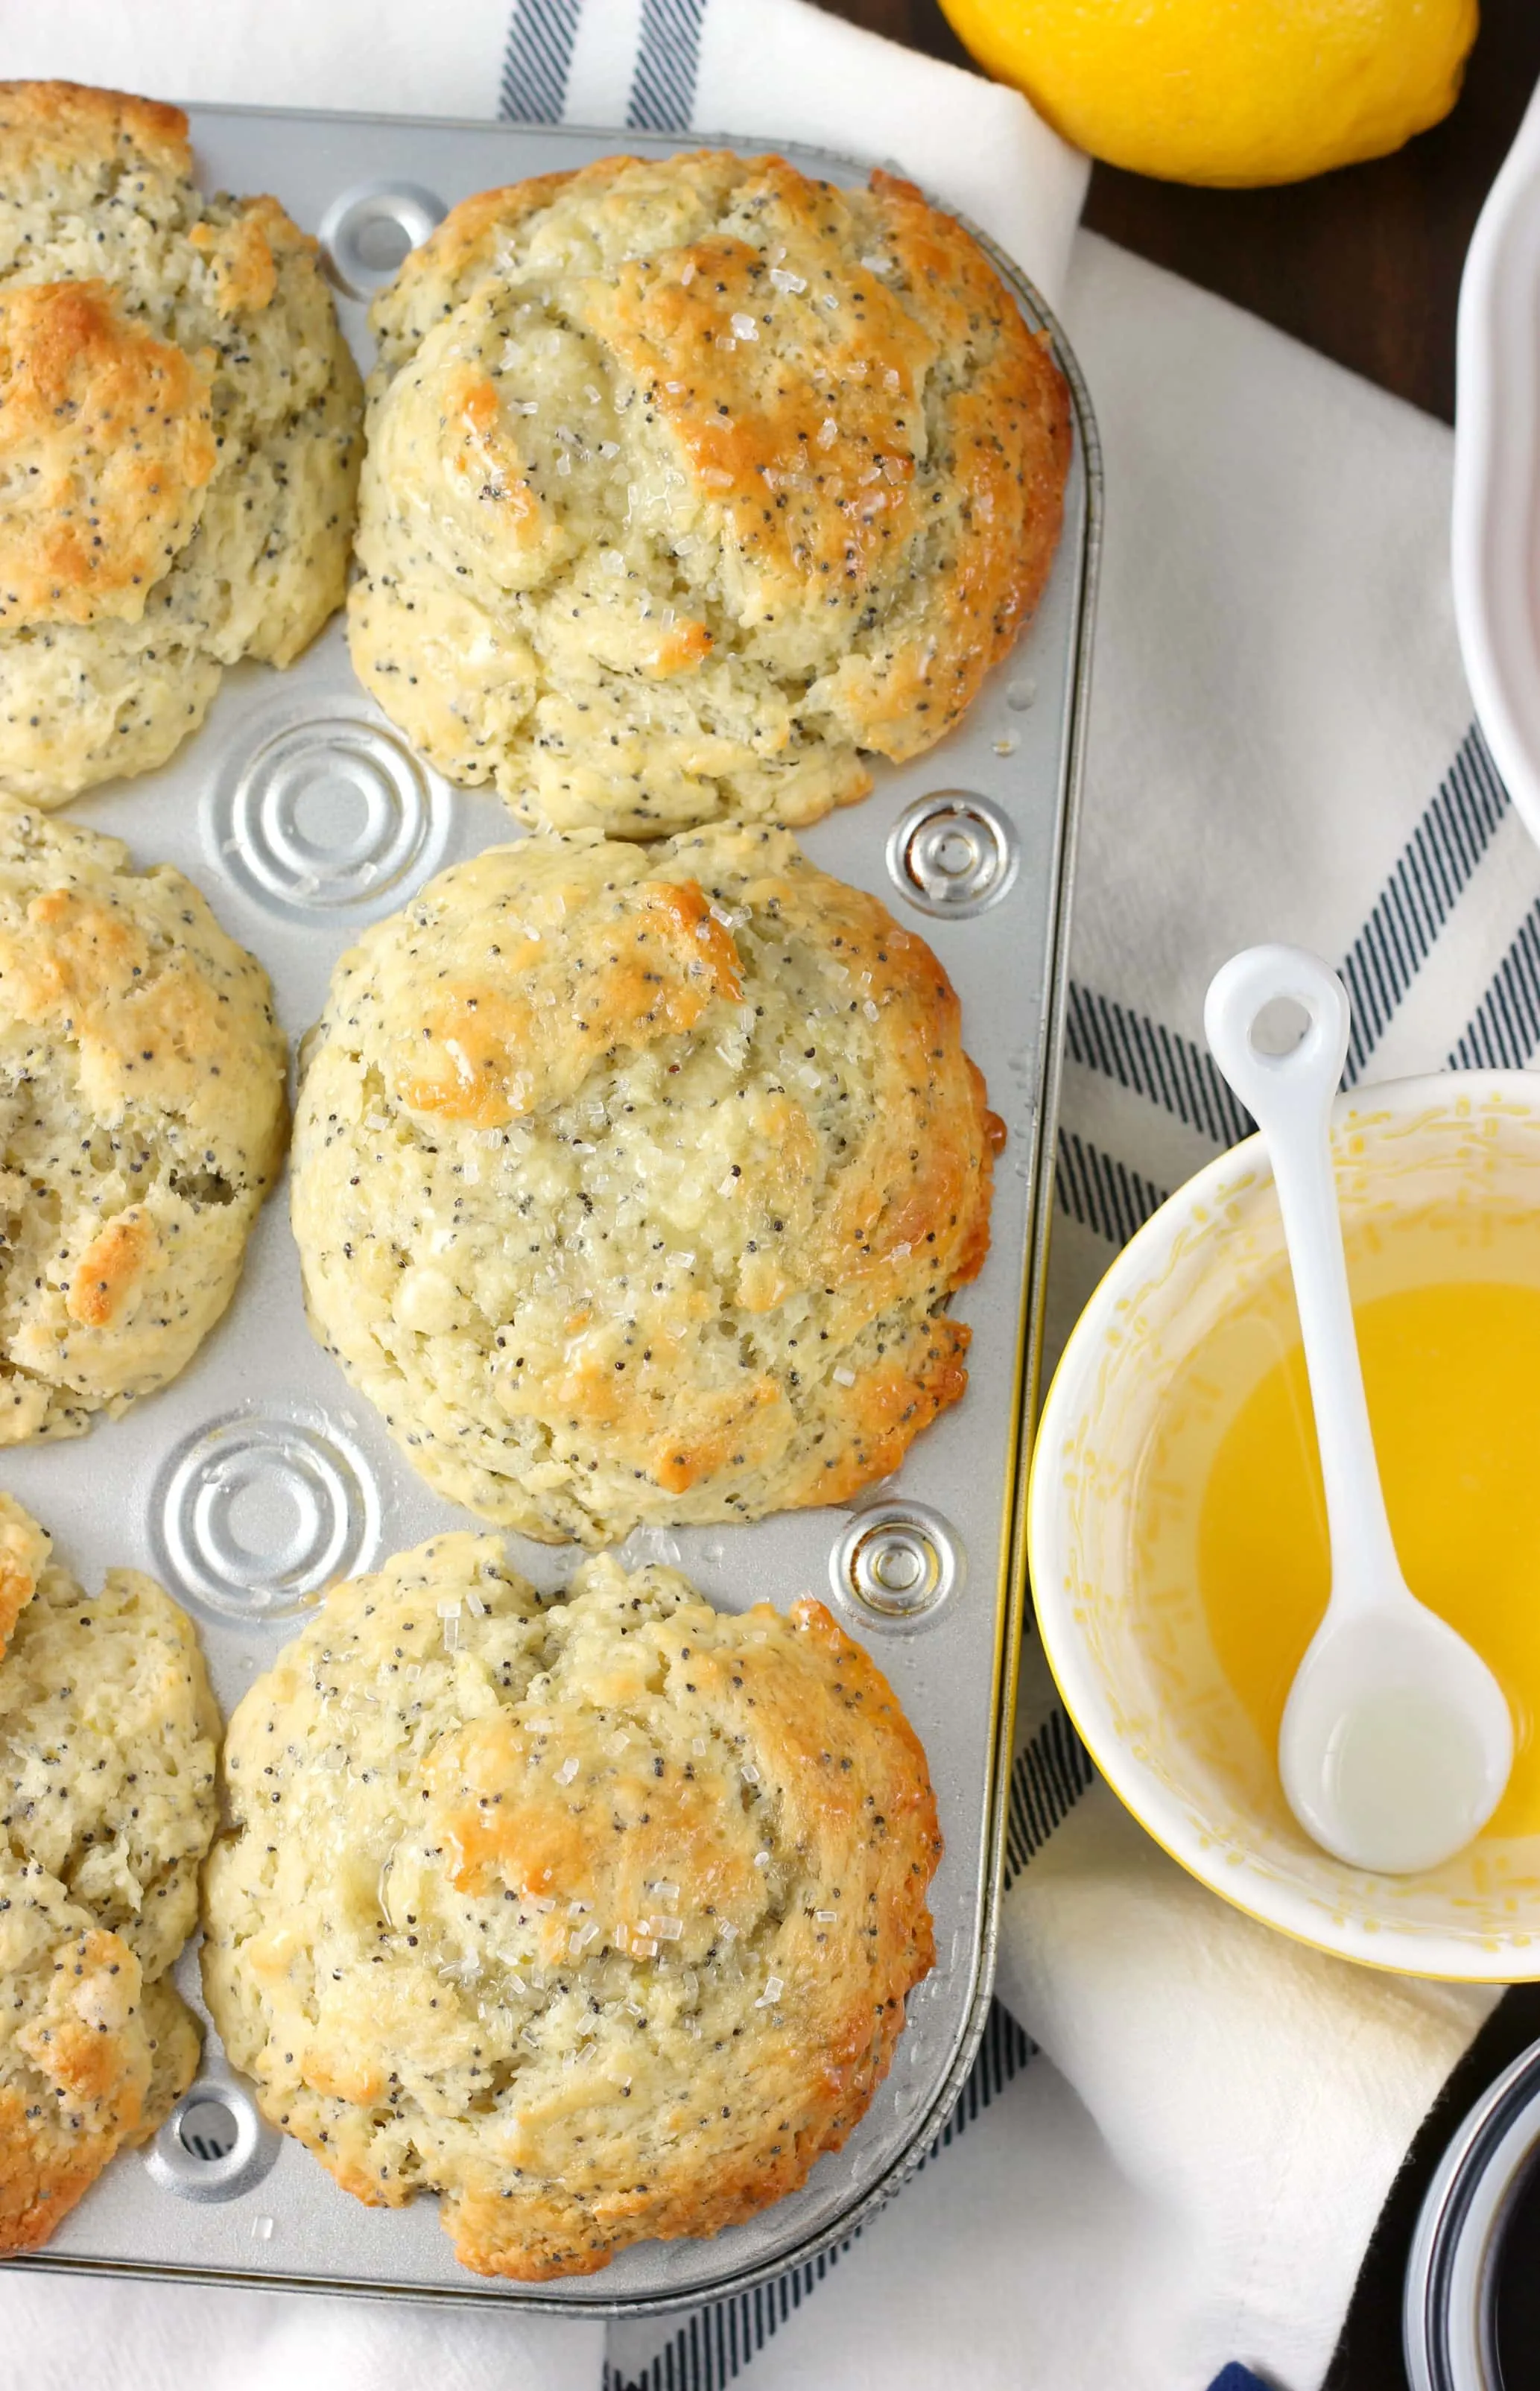 Scone and Muffin Scoop